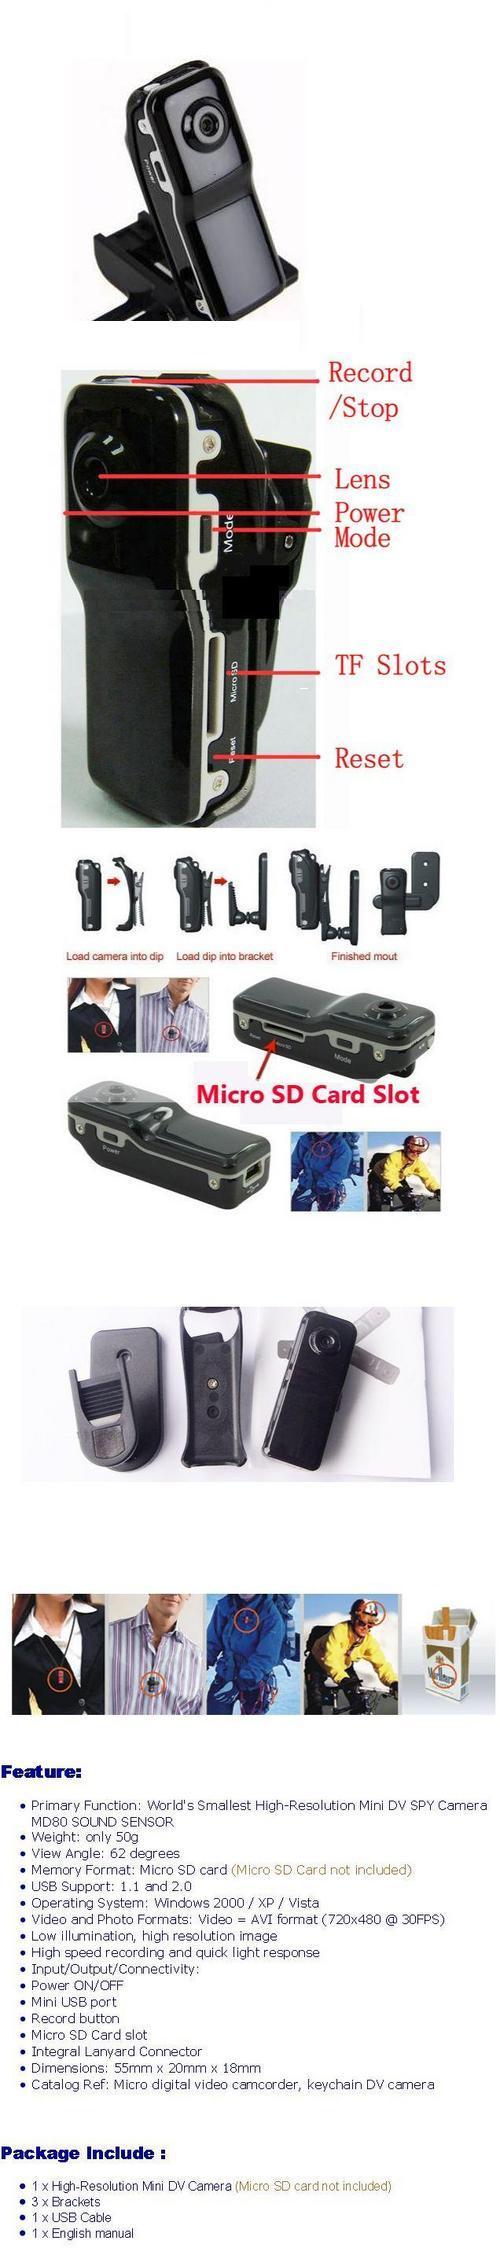 buy video camera gadgets spy kit ipod xbox 360 p90x  ipod touch iphone 3g cell phones  iphone 4xbox 360 console ps3  coach handbags